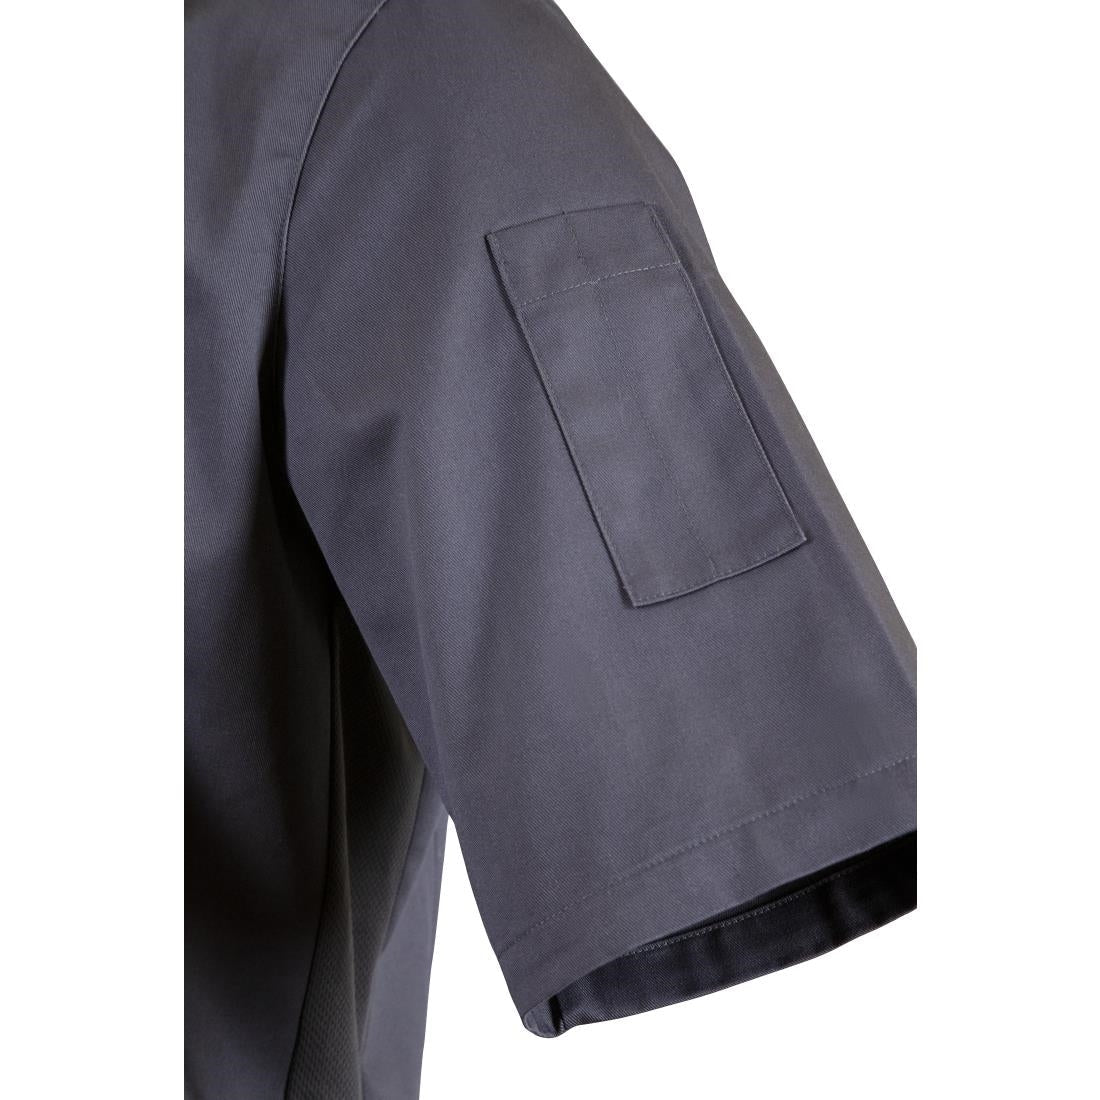 BB712-XL Southside Band Collar Chefs Jacket Charcoal Size XL JD Catering Equipment Solutions Ltd